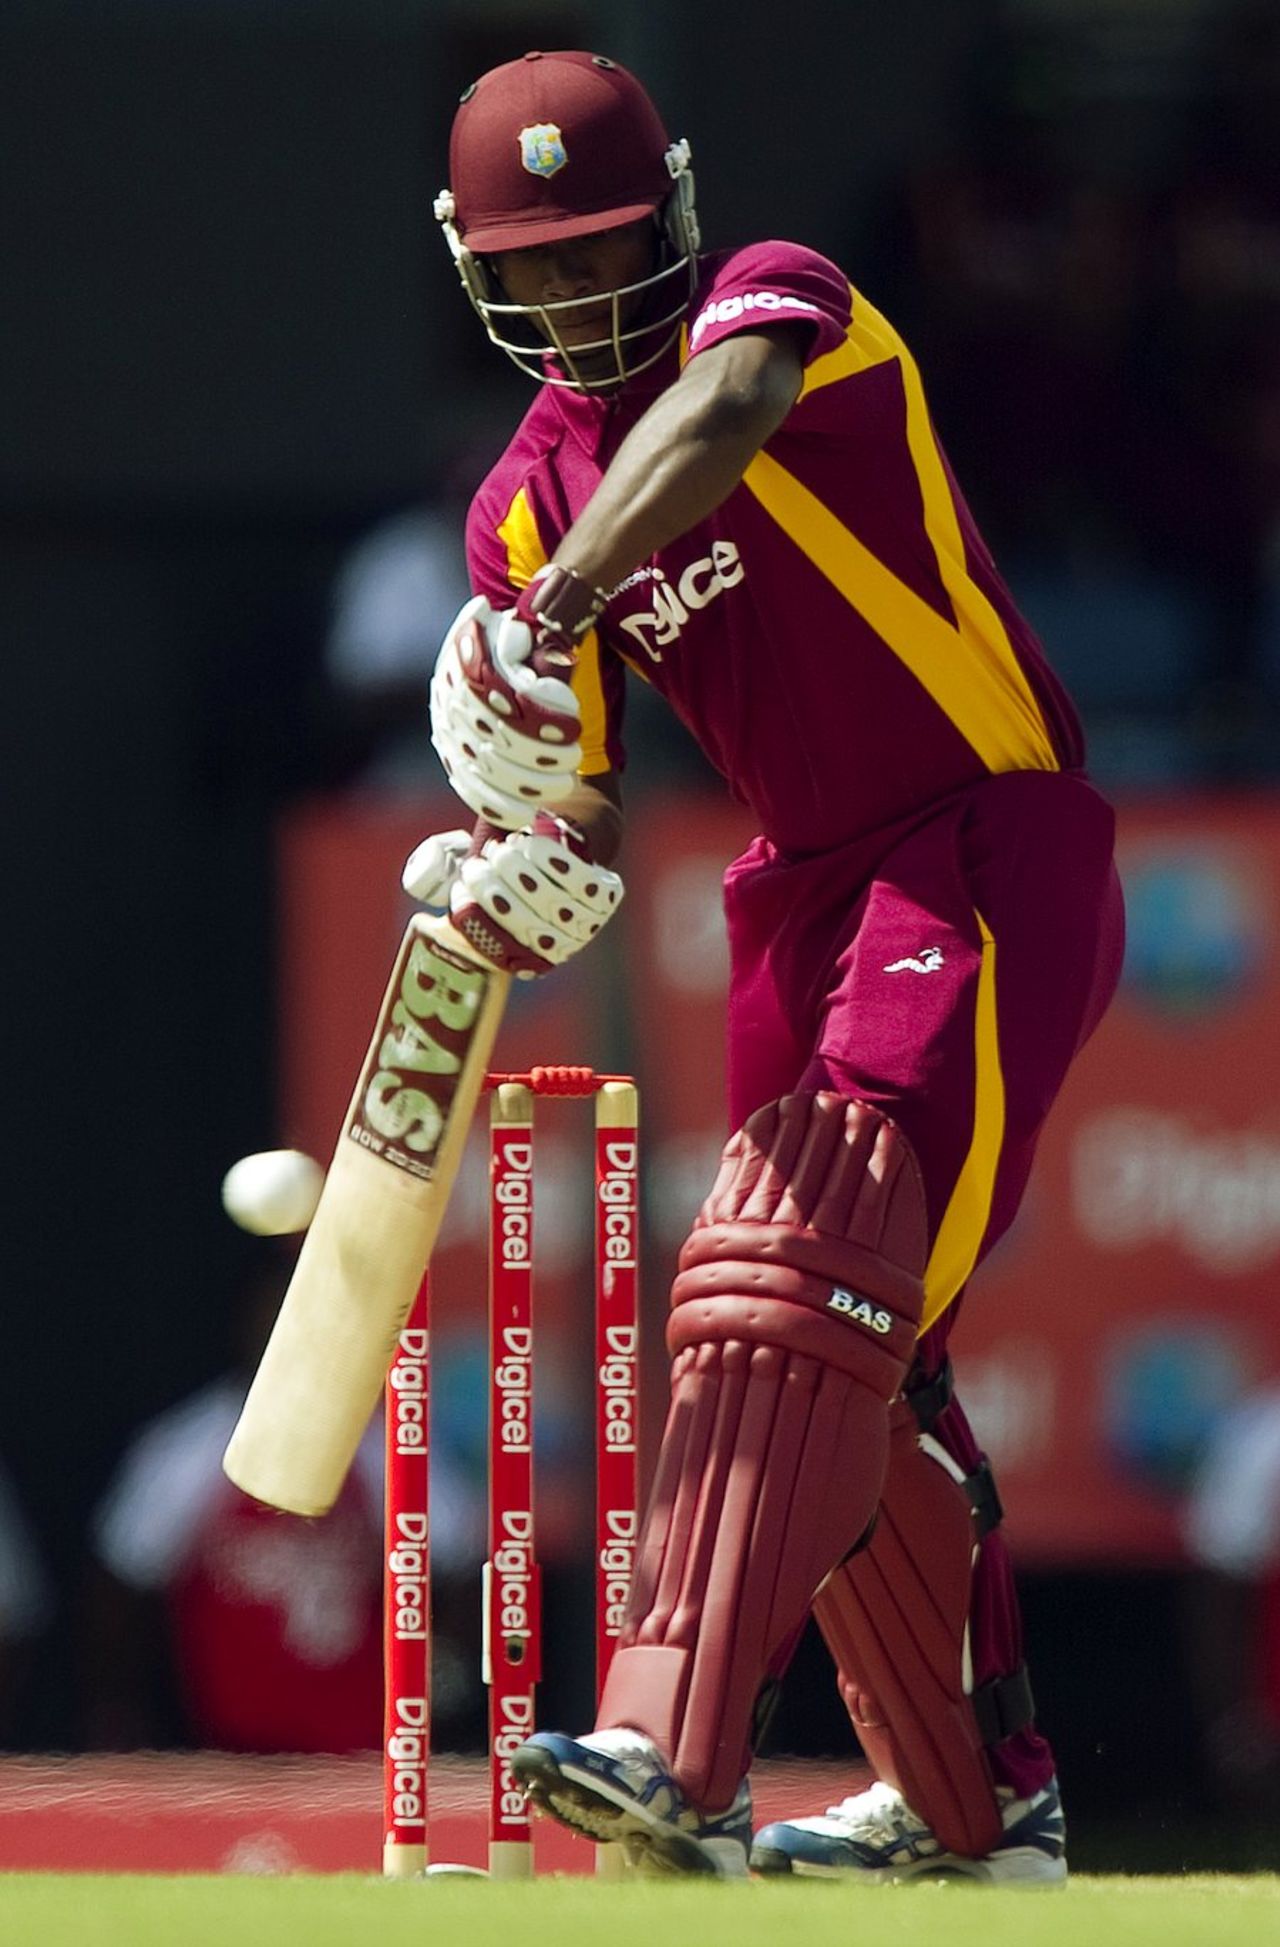 Johnson Charles made a slow and unconvincing start, West Indies v Australia, 4th ODI, Gros Islet, March 23, 2012